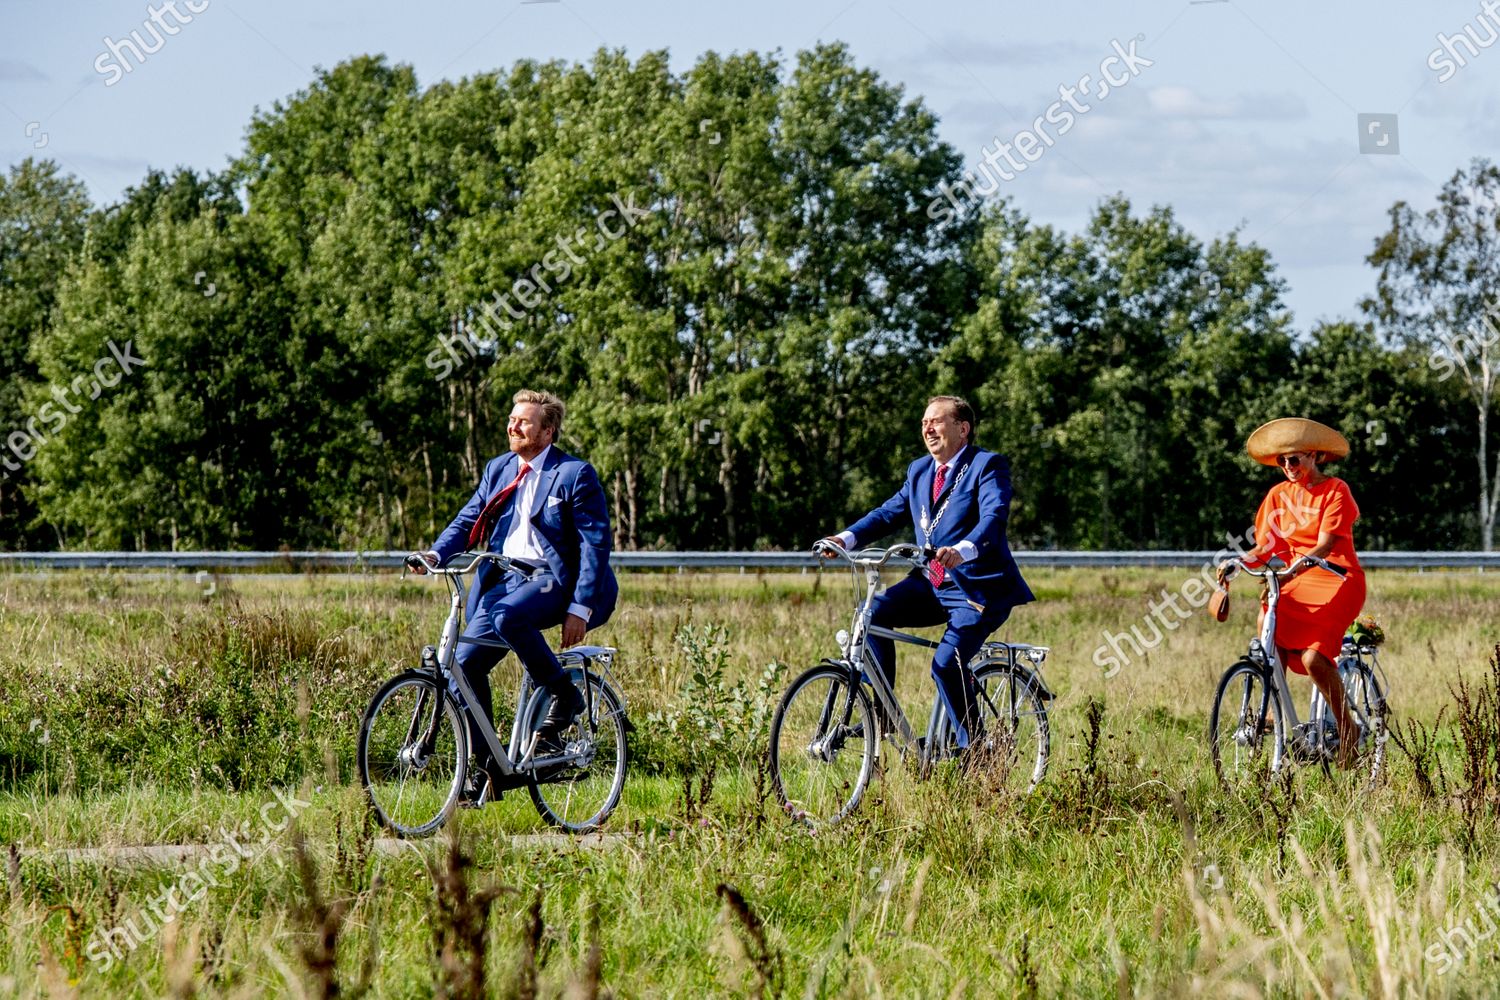 king-willem-alexander-and-queen-maxima-visit-to-ooststellingwerf-the-netherlands-shutterstock-editorial-10779750j.jpg